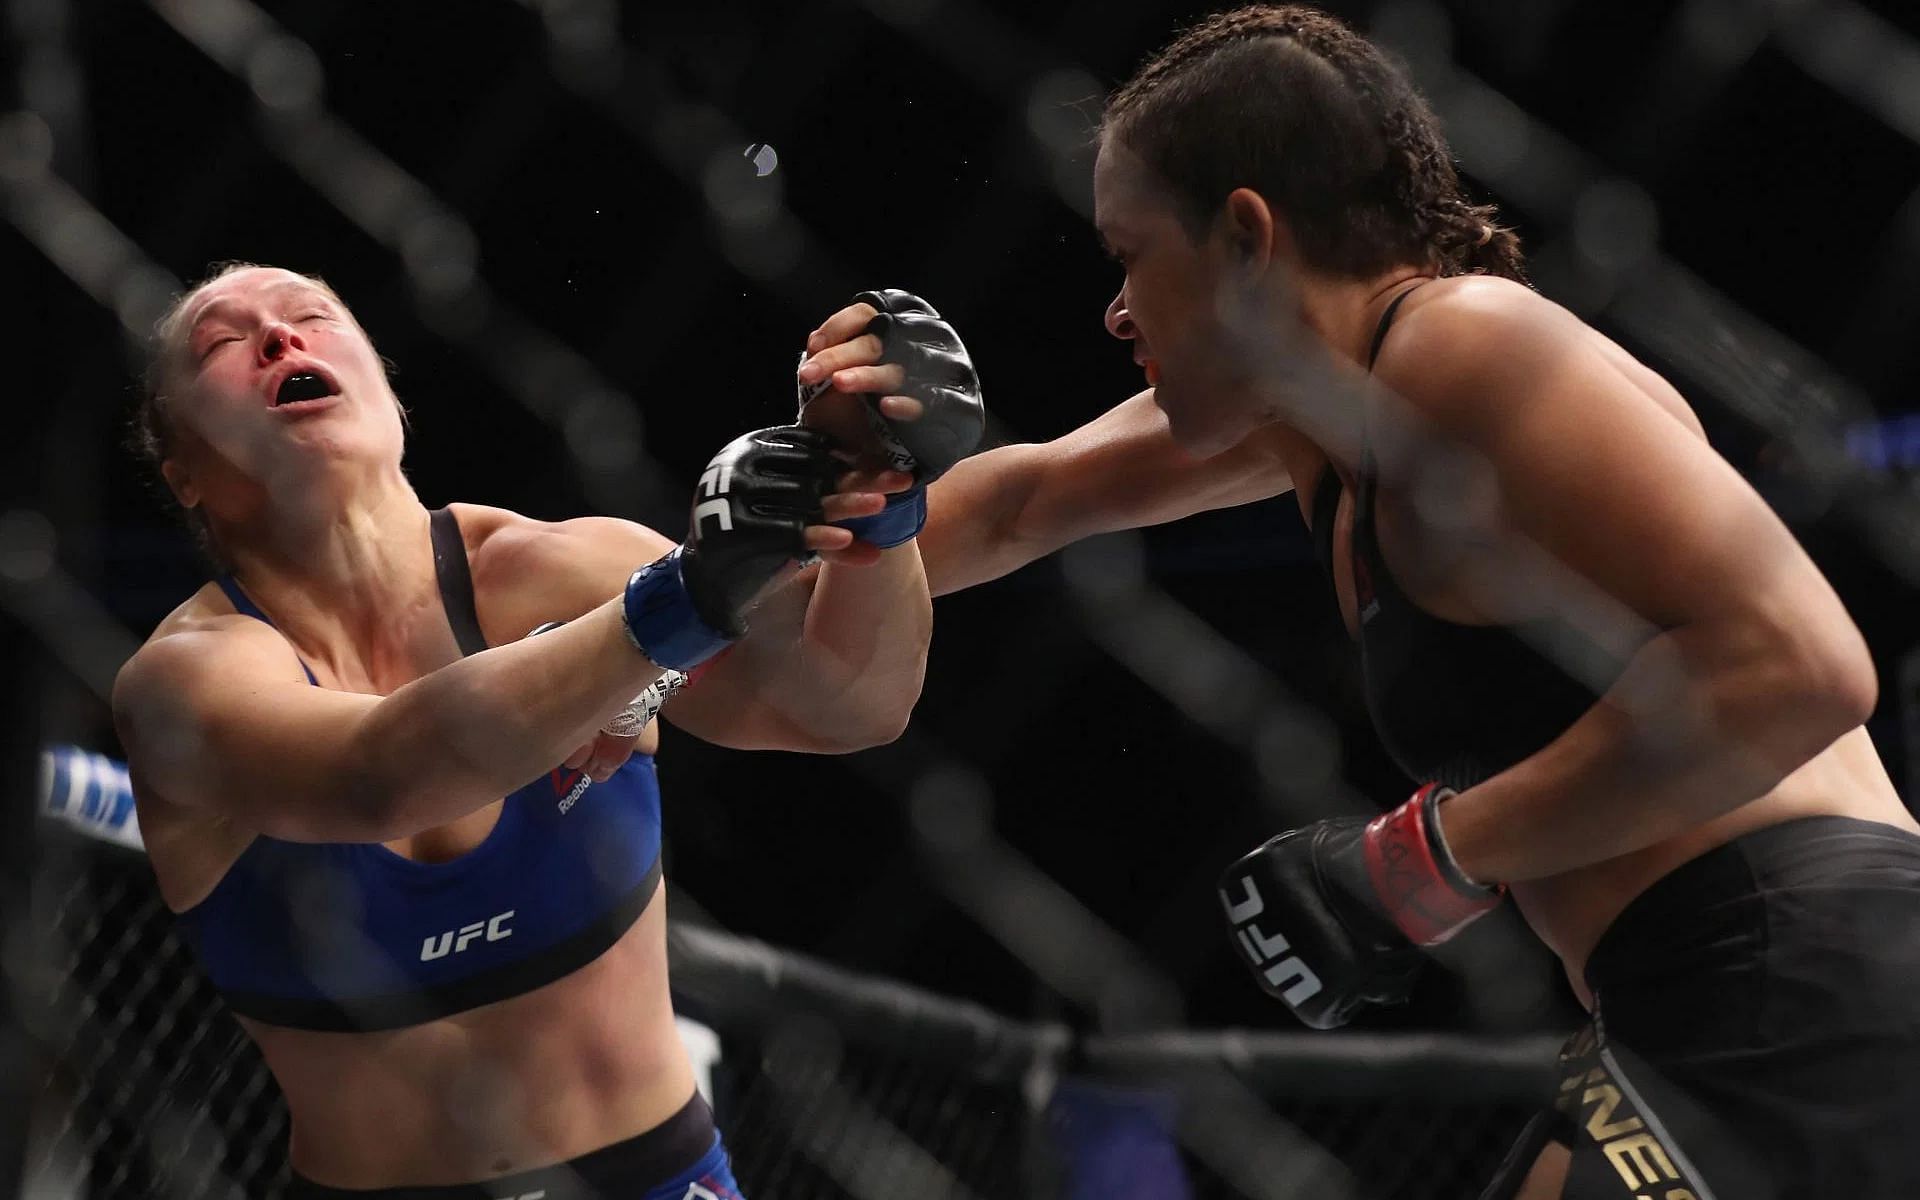 Despite the holes in her striking game, many fans saw Ronda Rousey as unstoppable